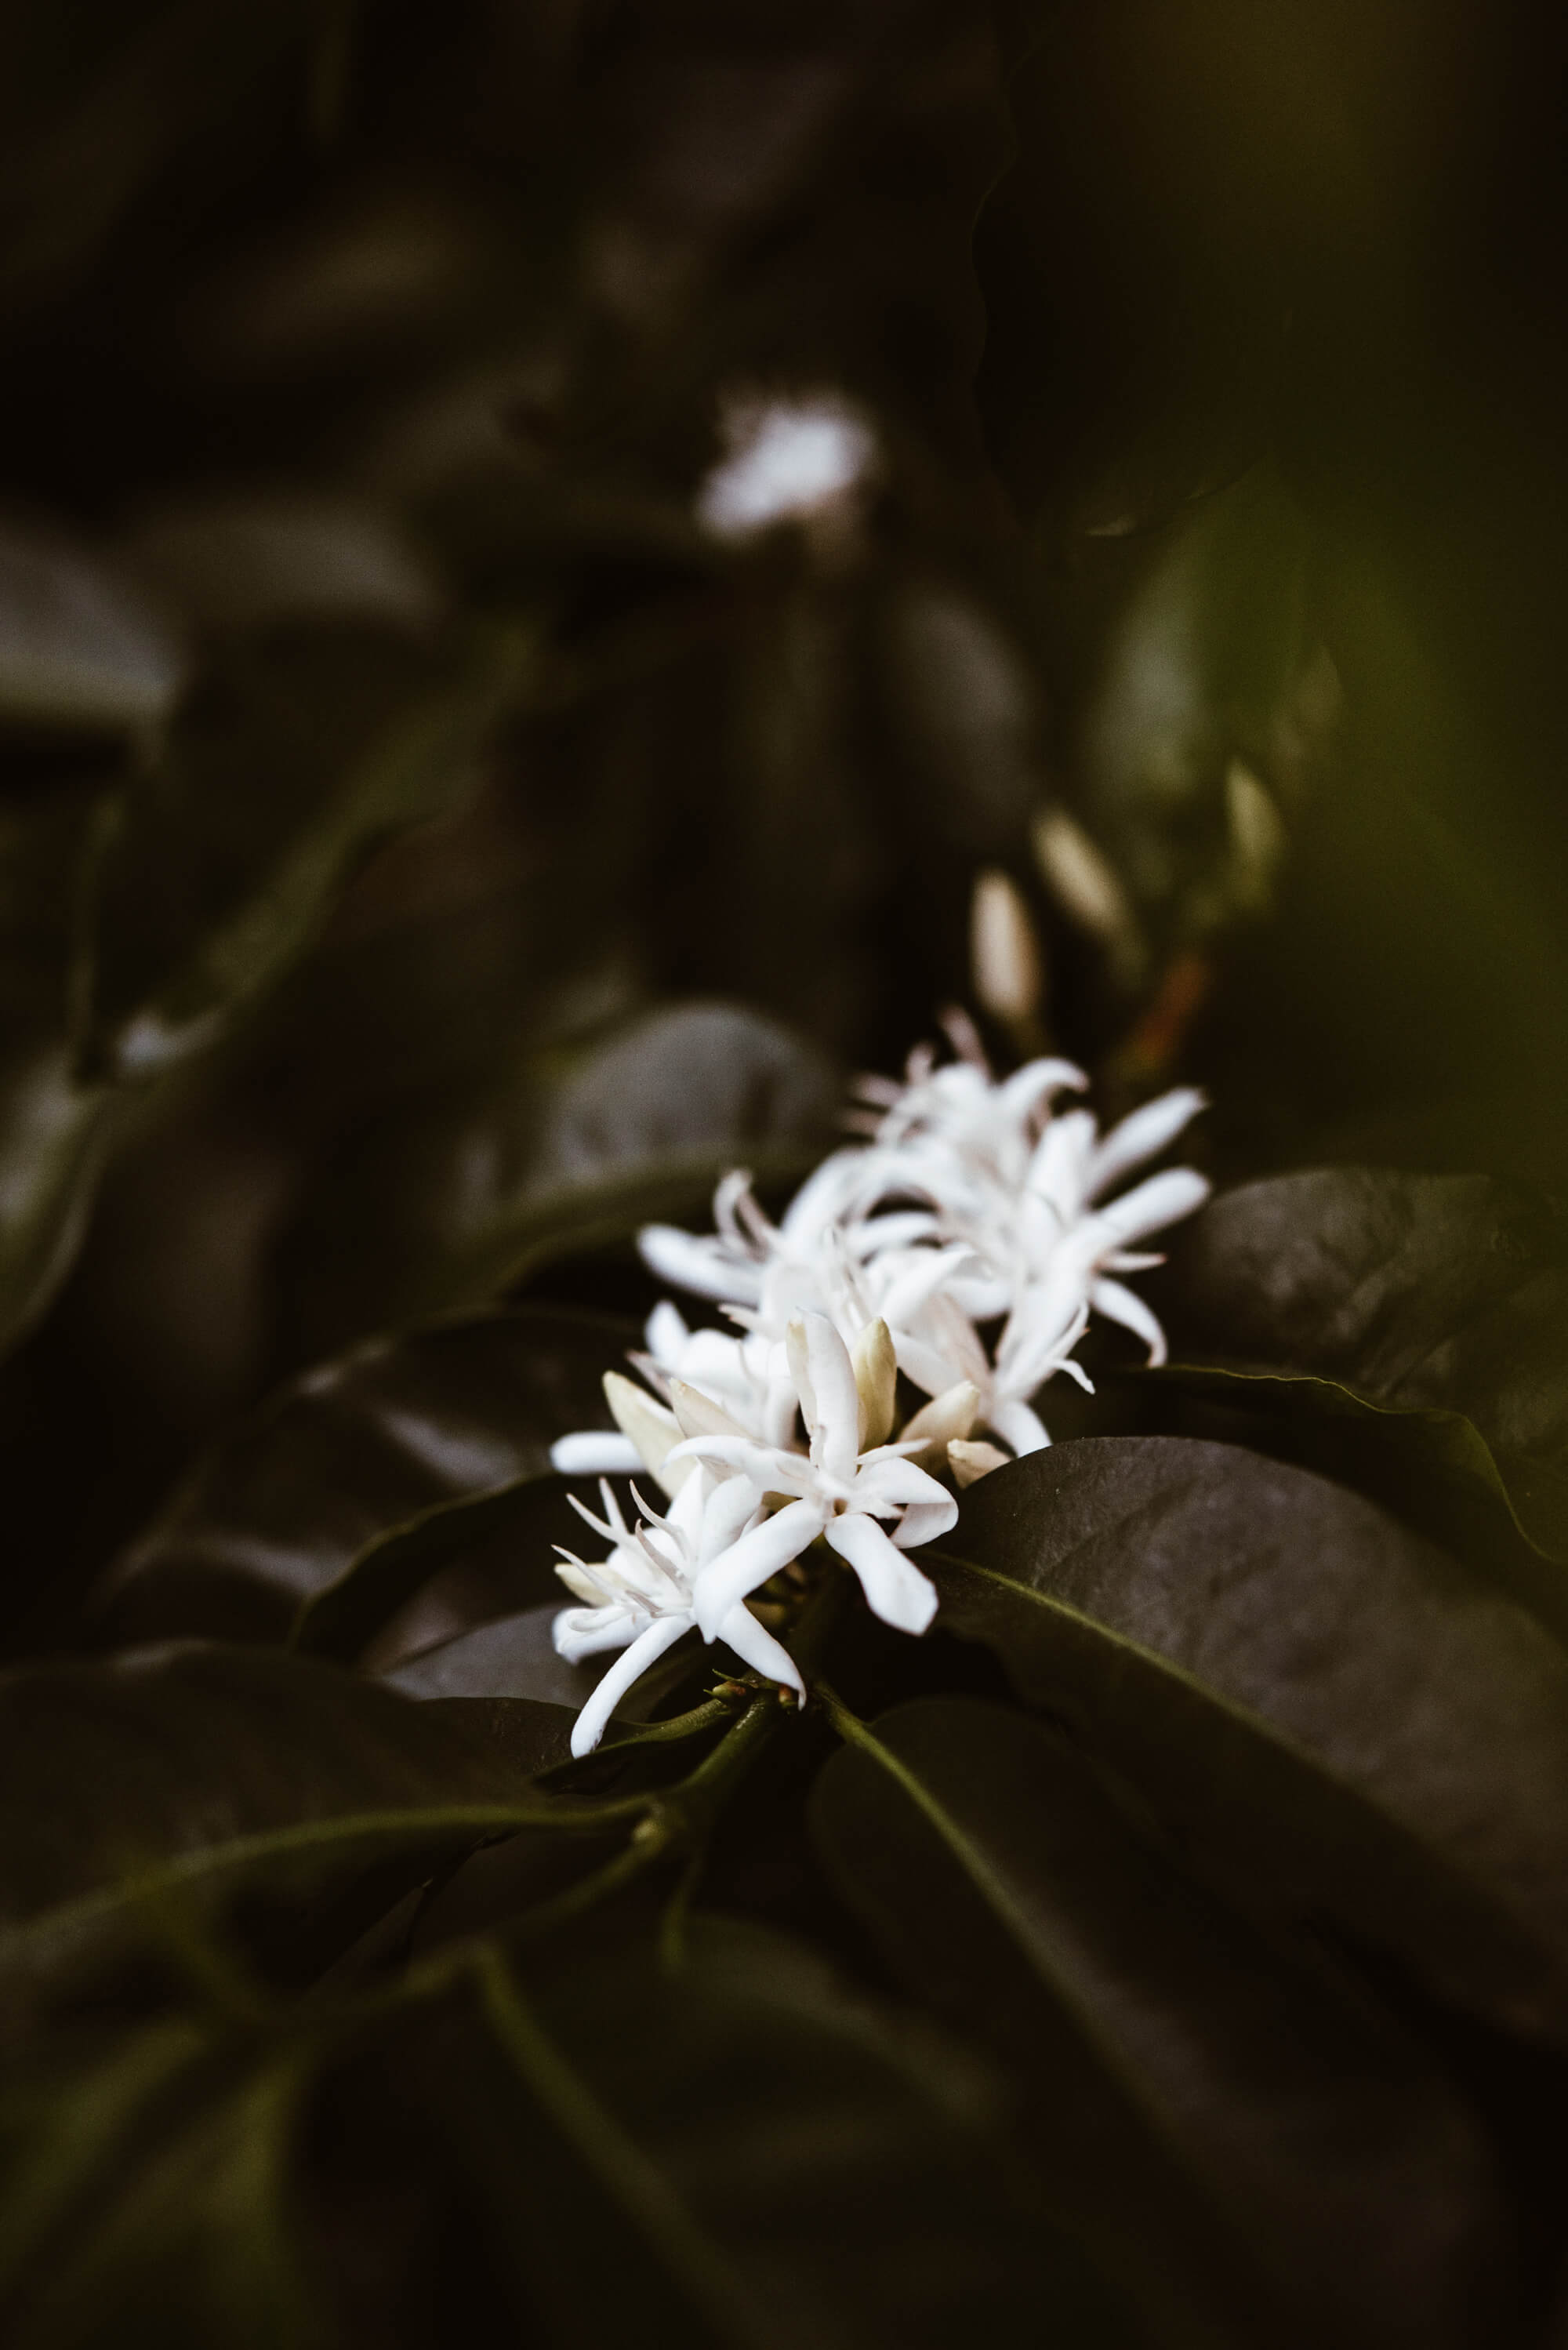 Coffee plant with white flowers.